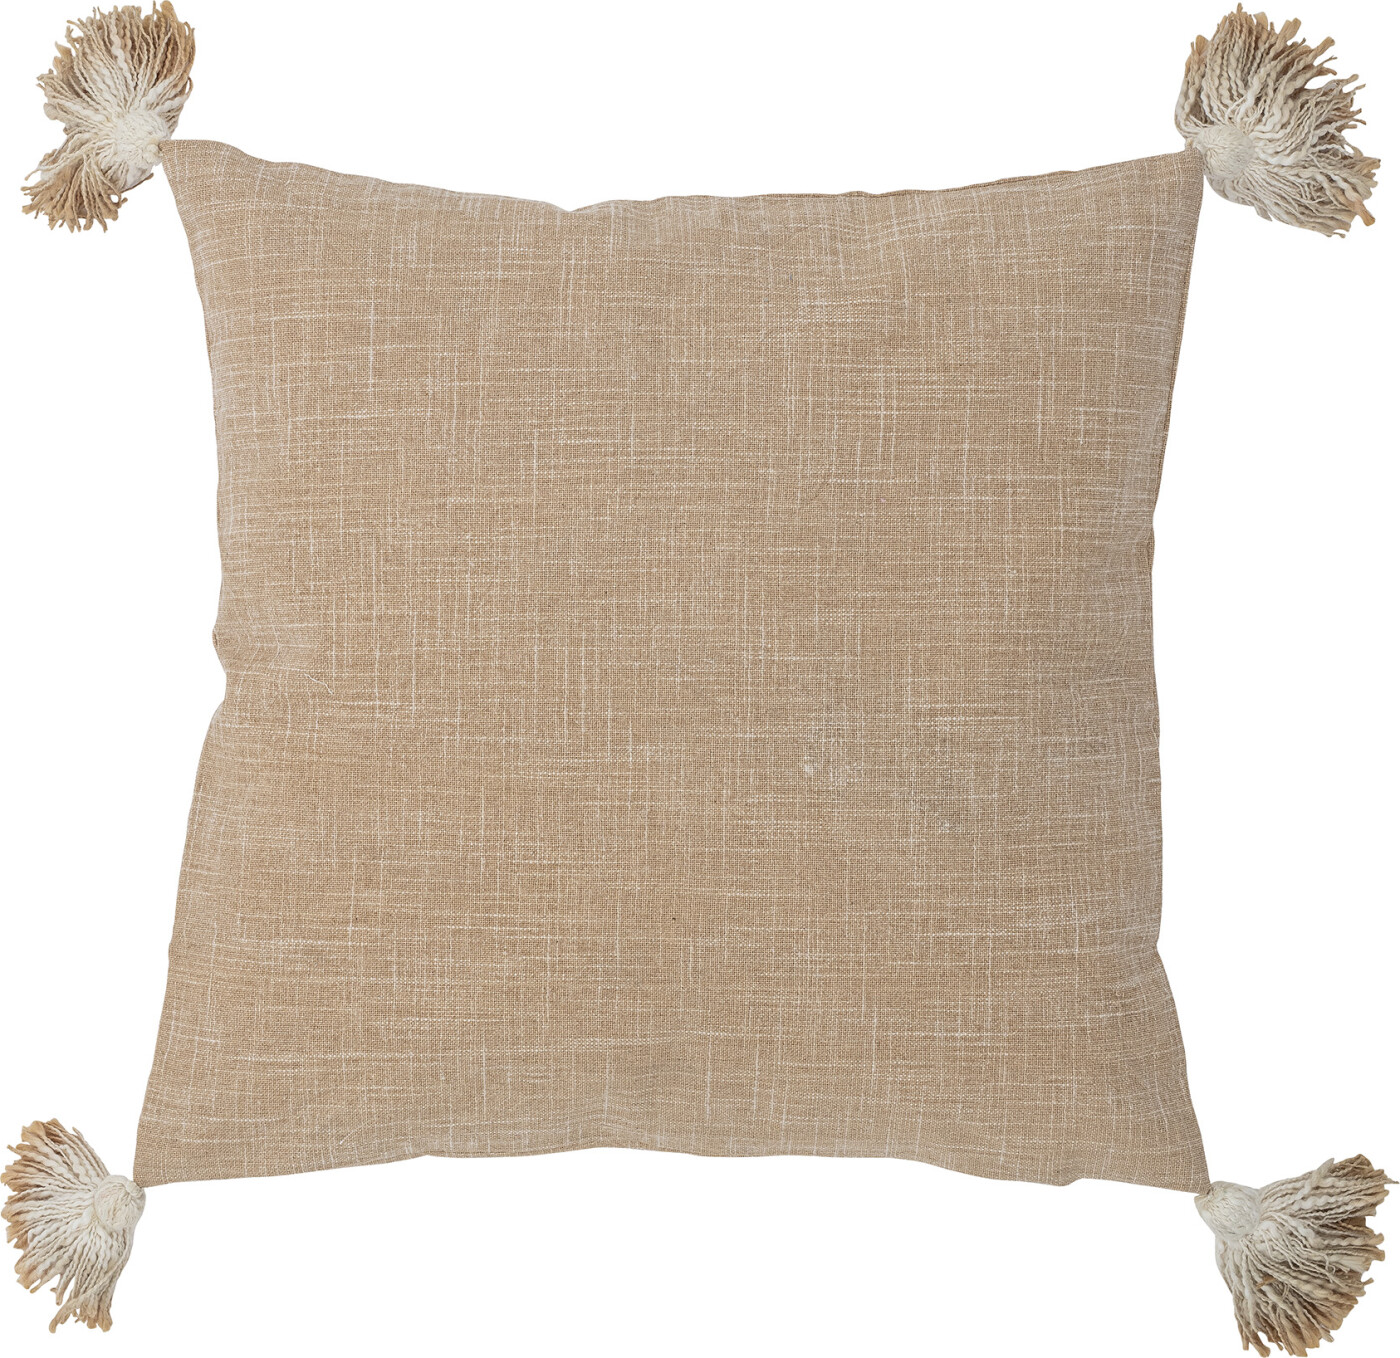 Bloomingville - Siff Pude - Natur - Bomuld - 45x45 Cm